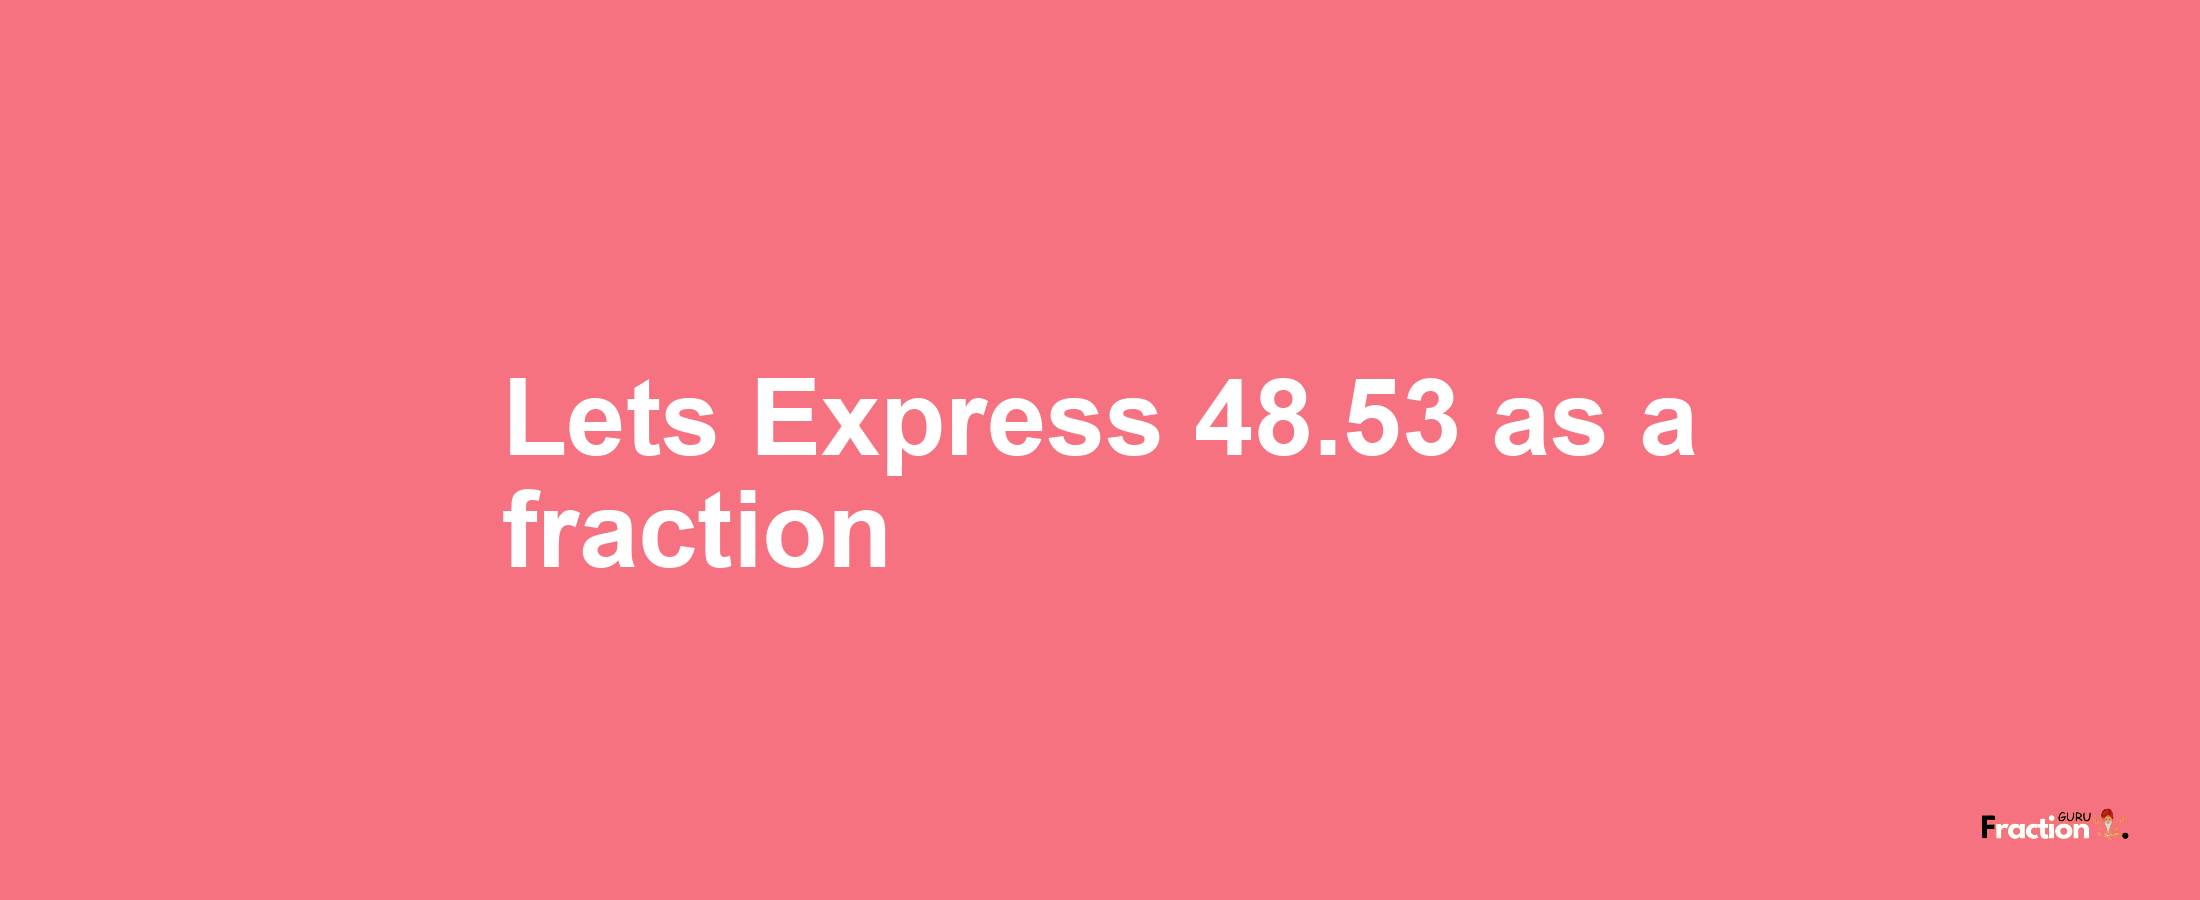 Lets Express 48.53 as afraction